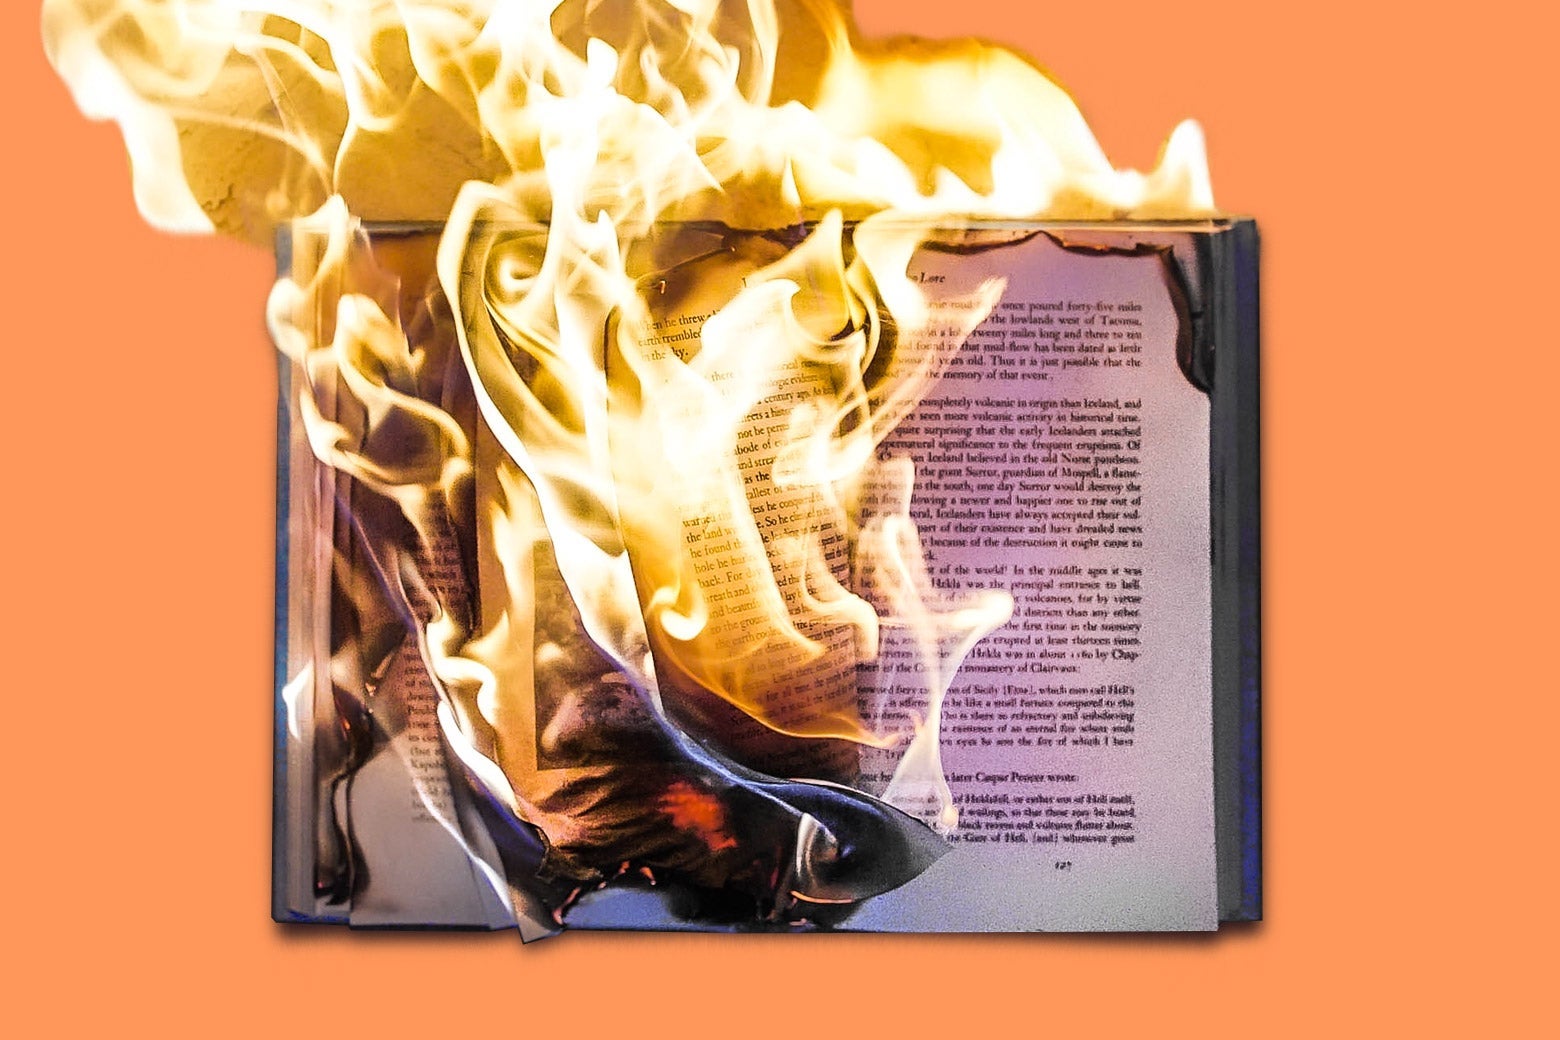 An open book is on fire against an orange background.